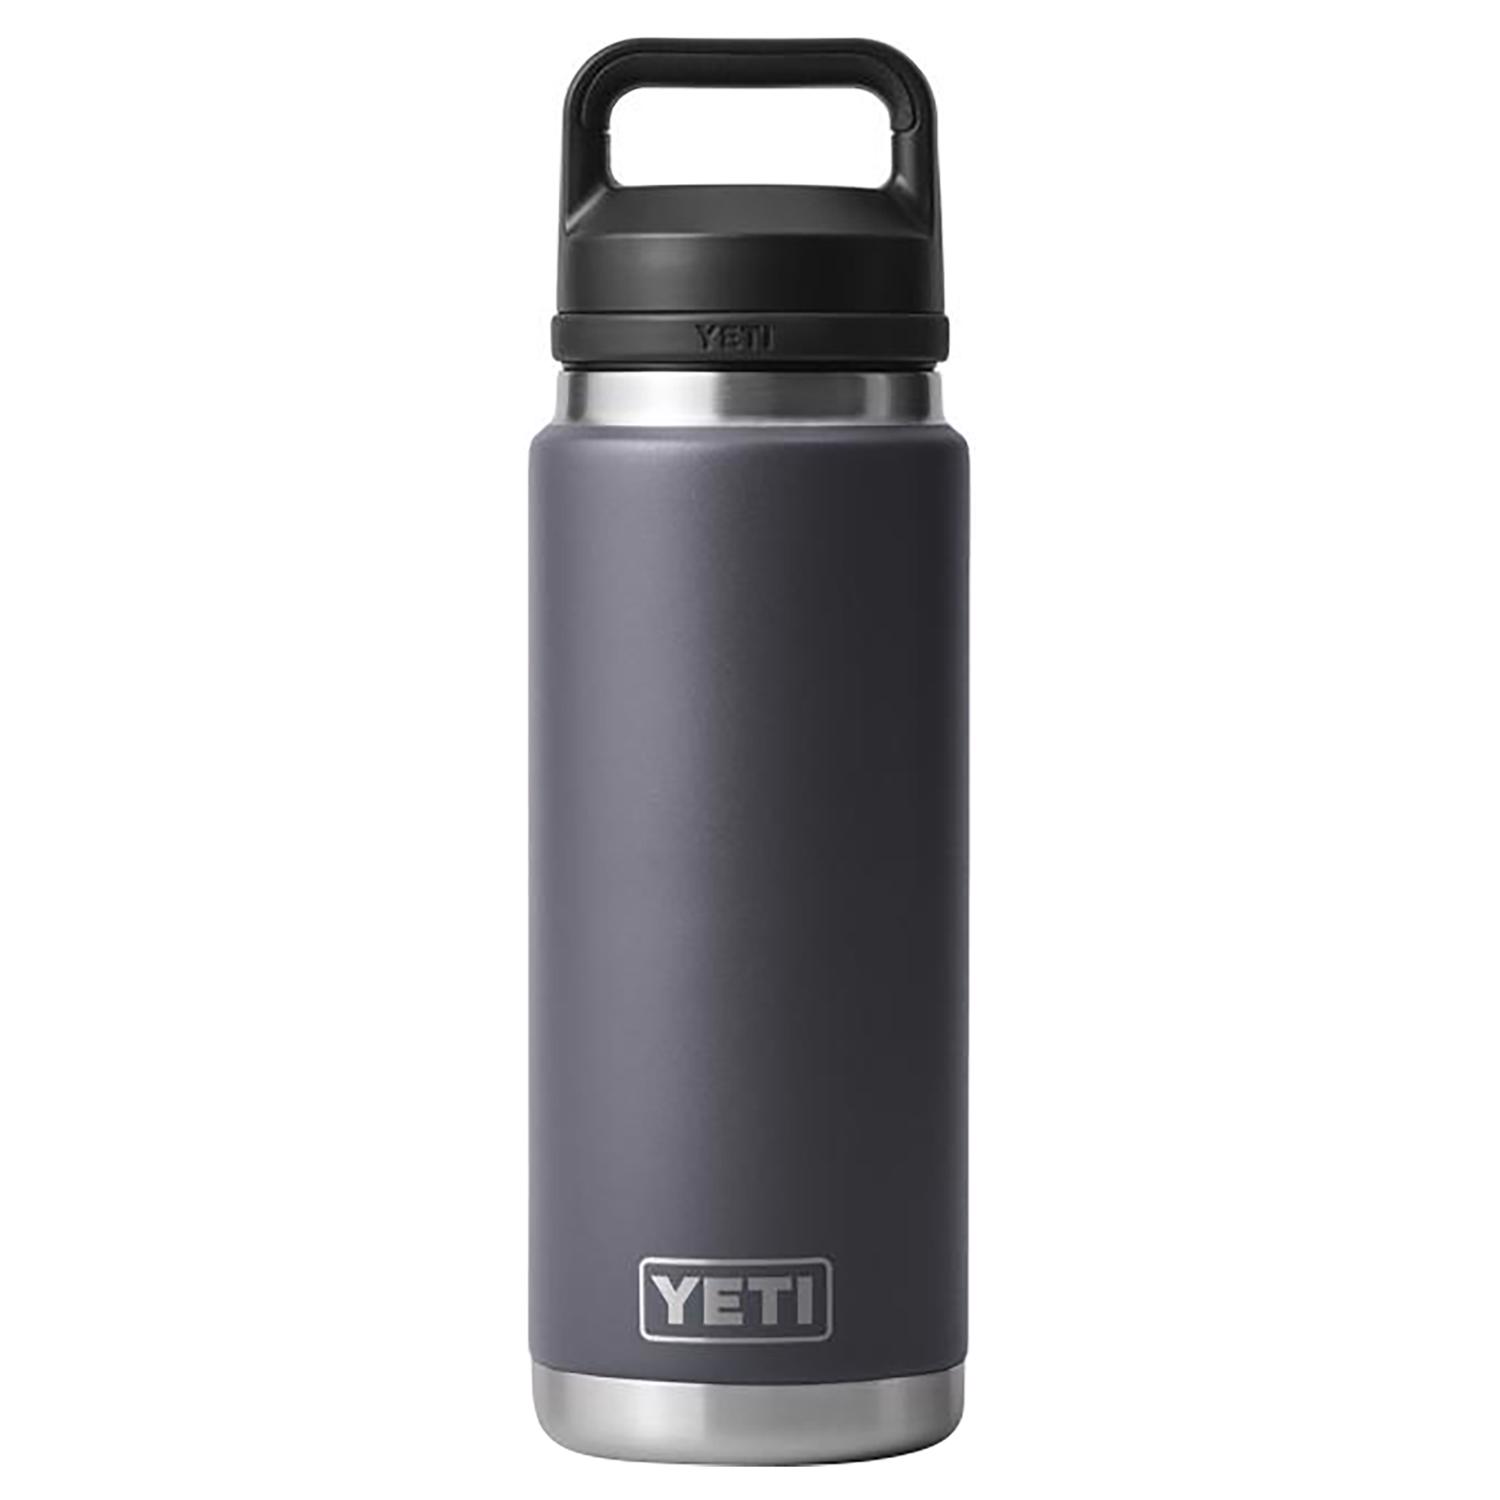 Photos - Other Accessories Yeti Rambler 26 oz Charcoal BPA Free Bottle with Chug Cap 21071501174 